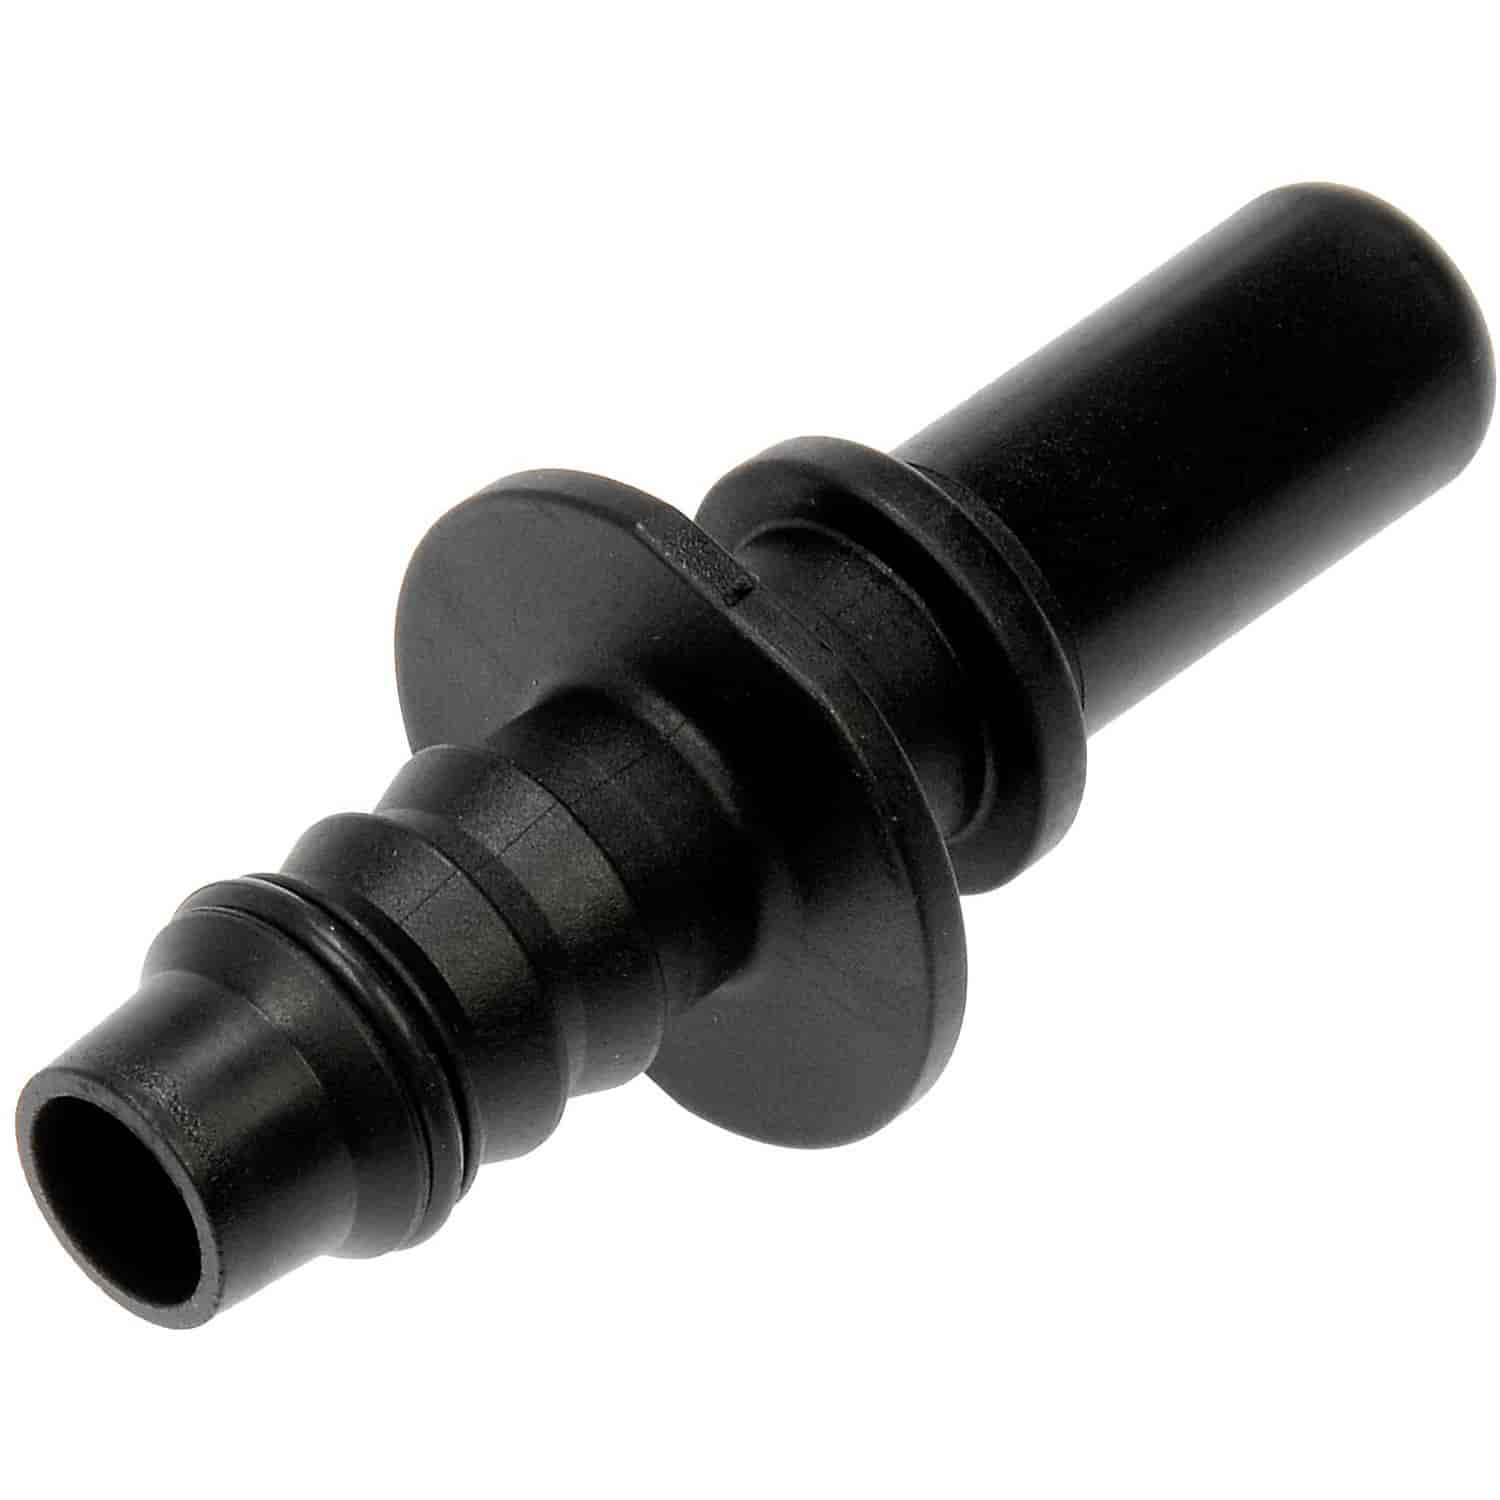 Male Connector 12mm Steel to 10mm Nylon with O ring